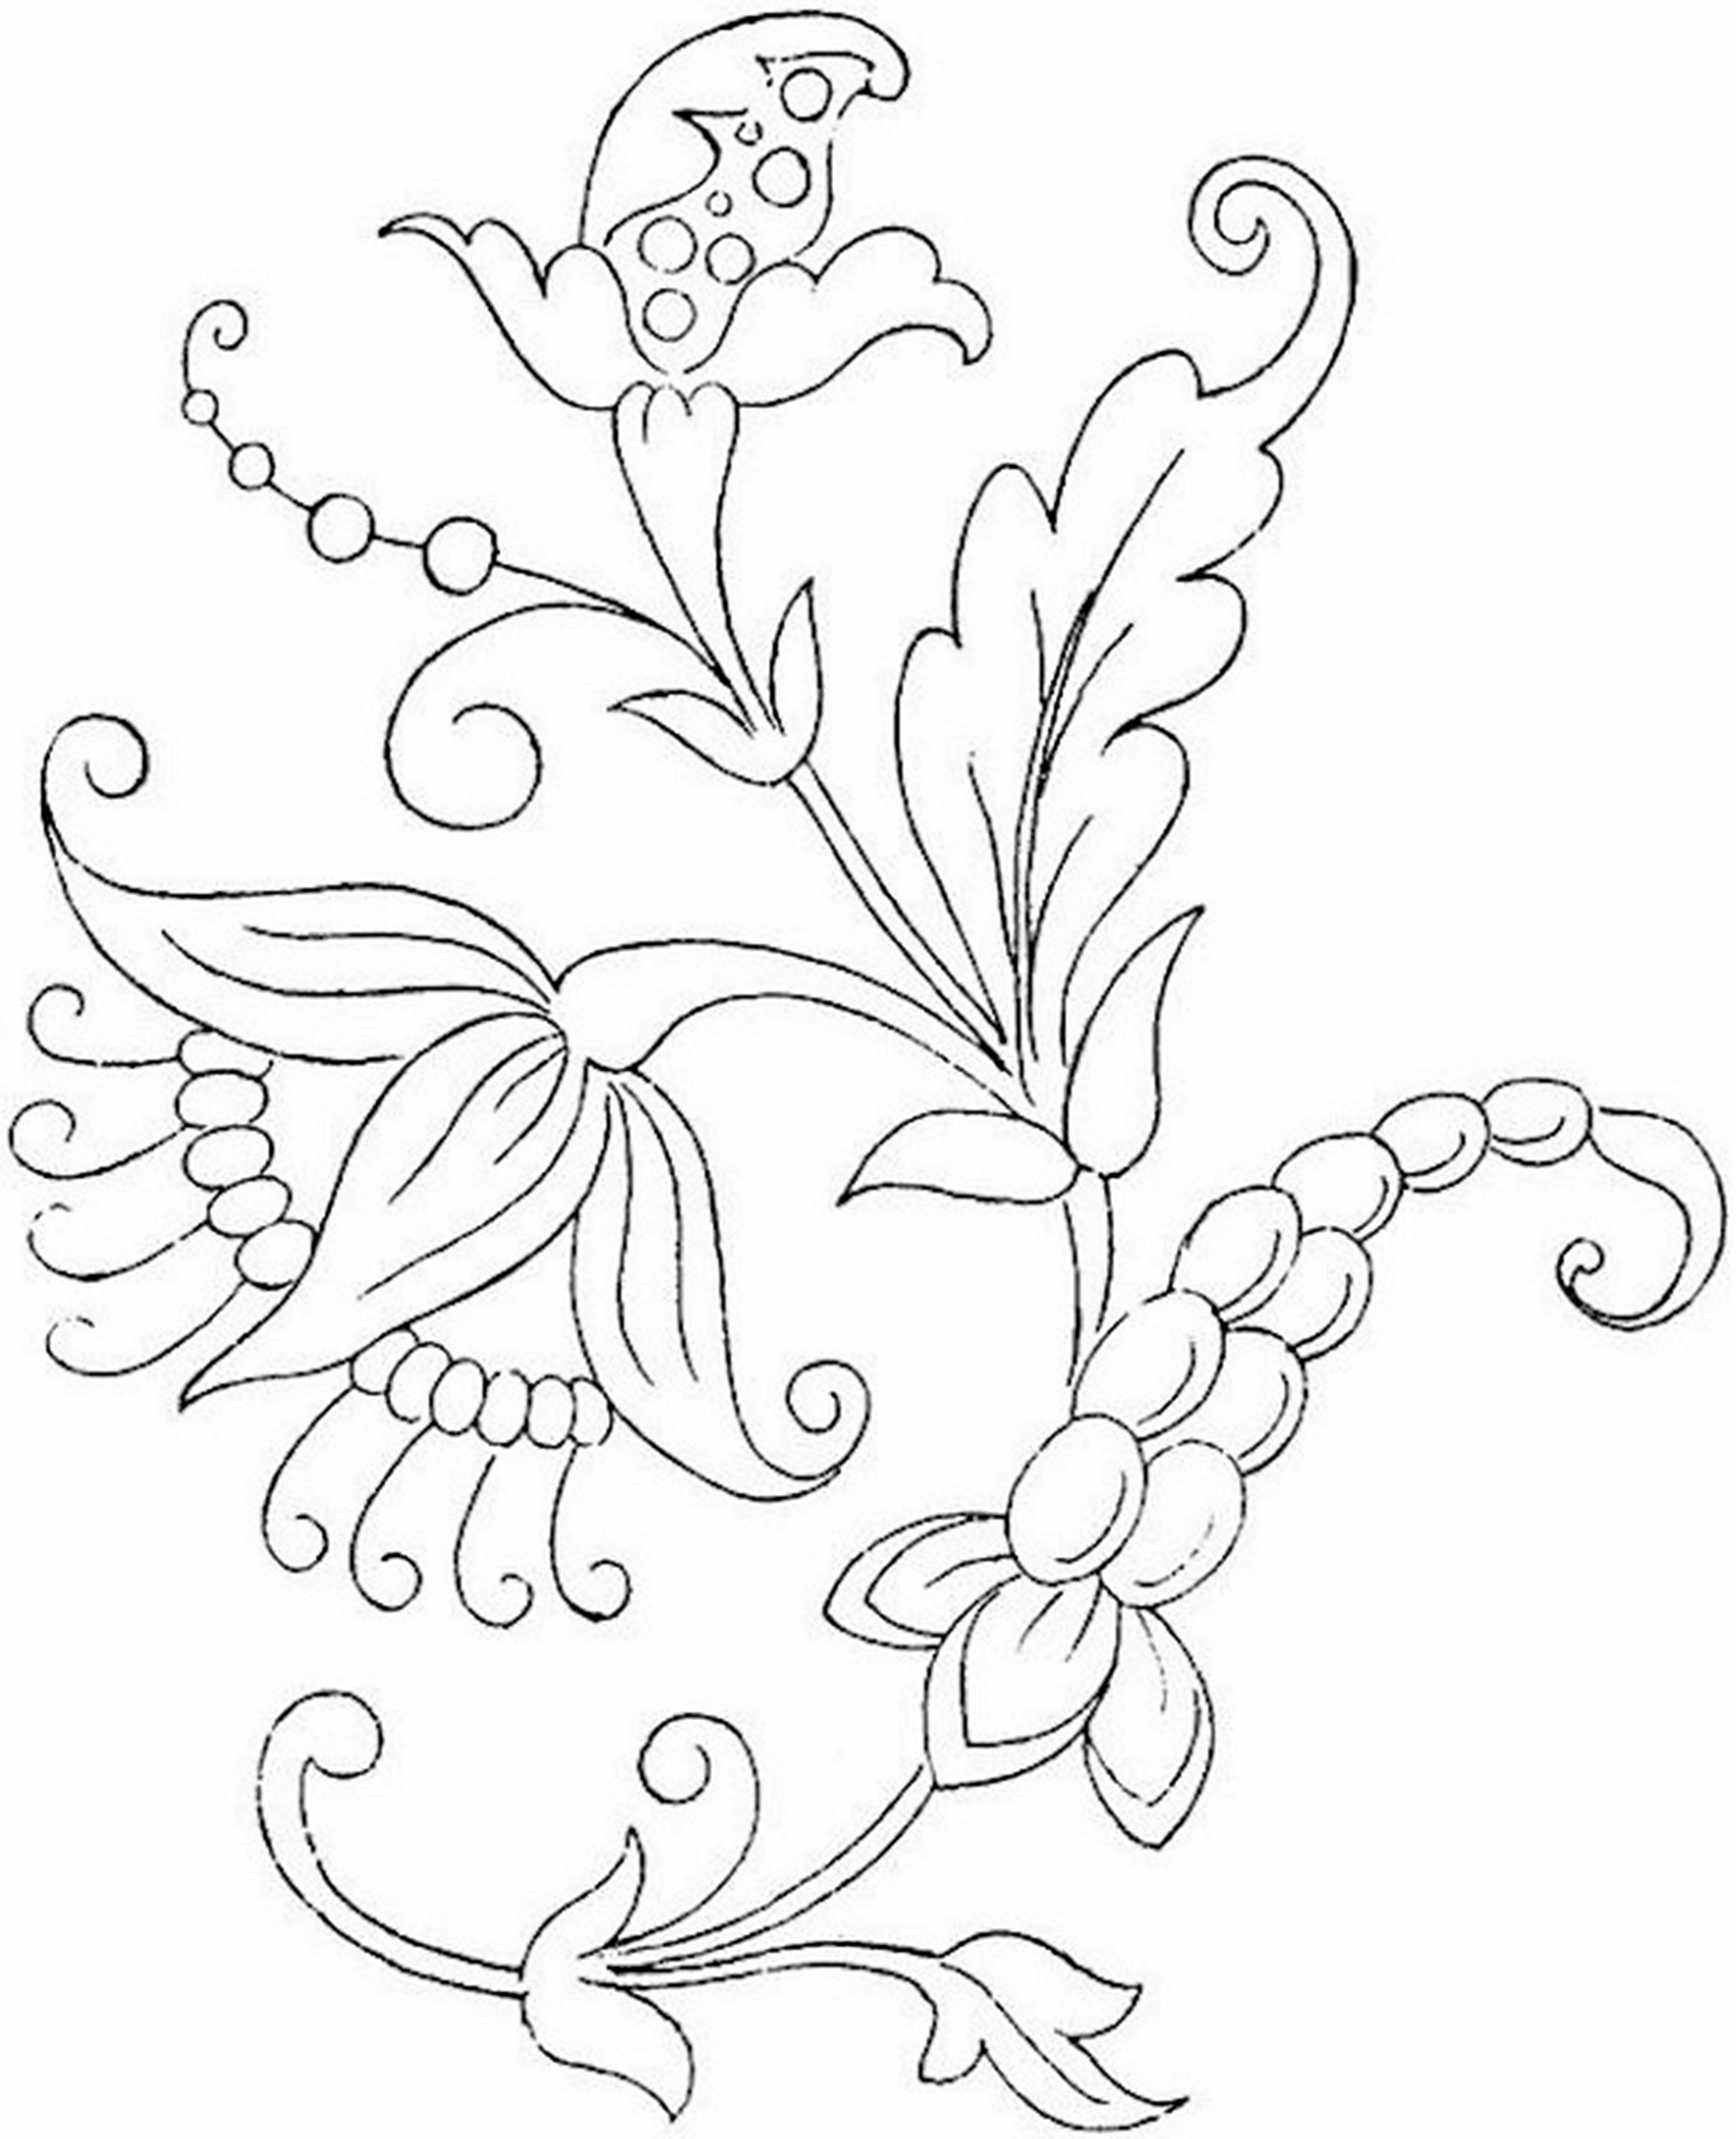 Download Free Printable Flower Coloring Pages For Kids - Best ...